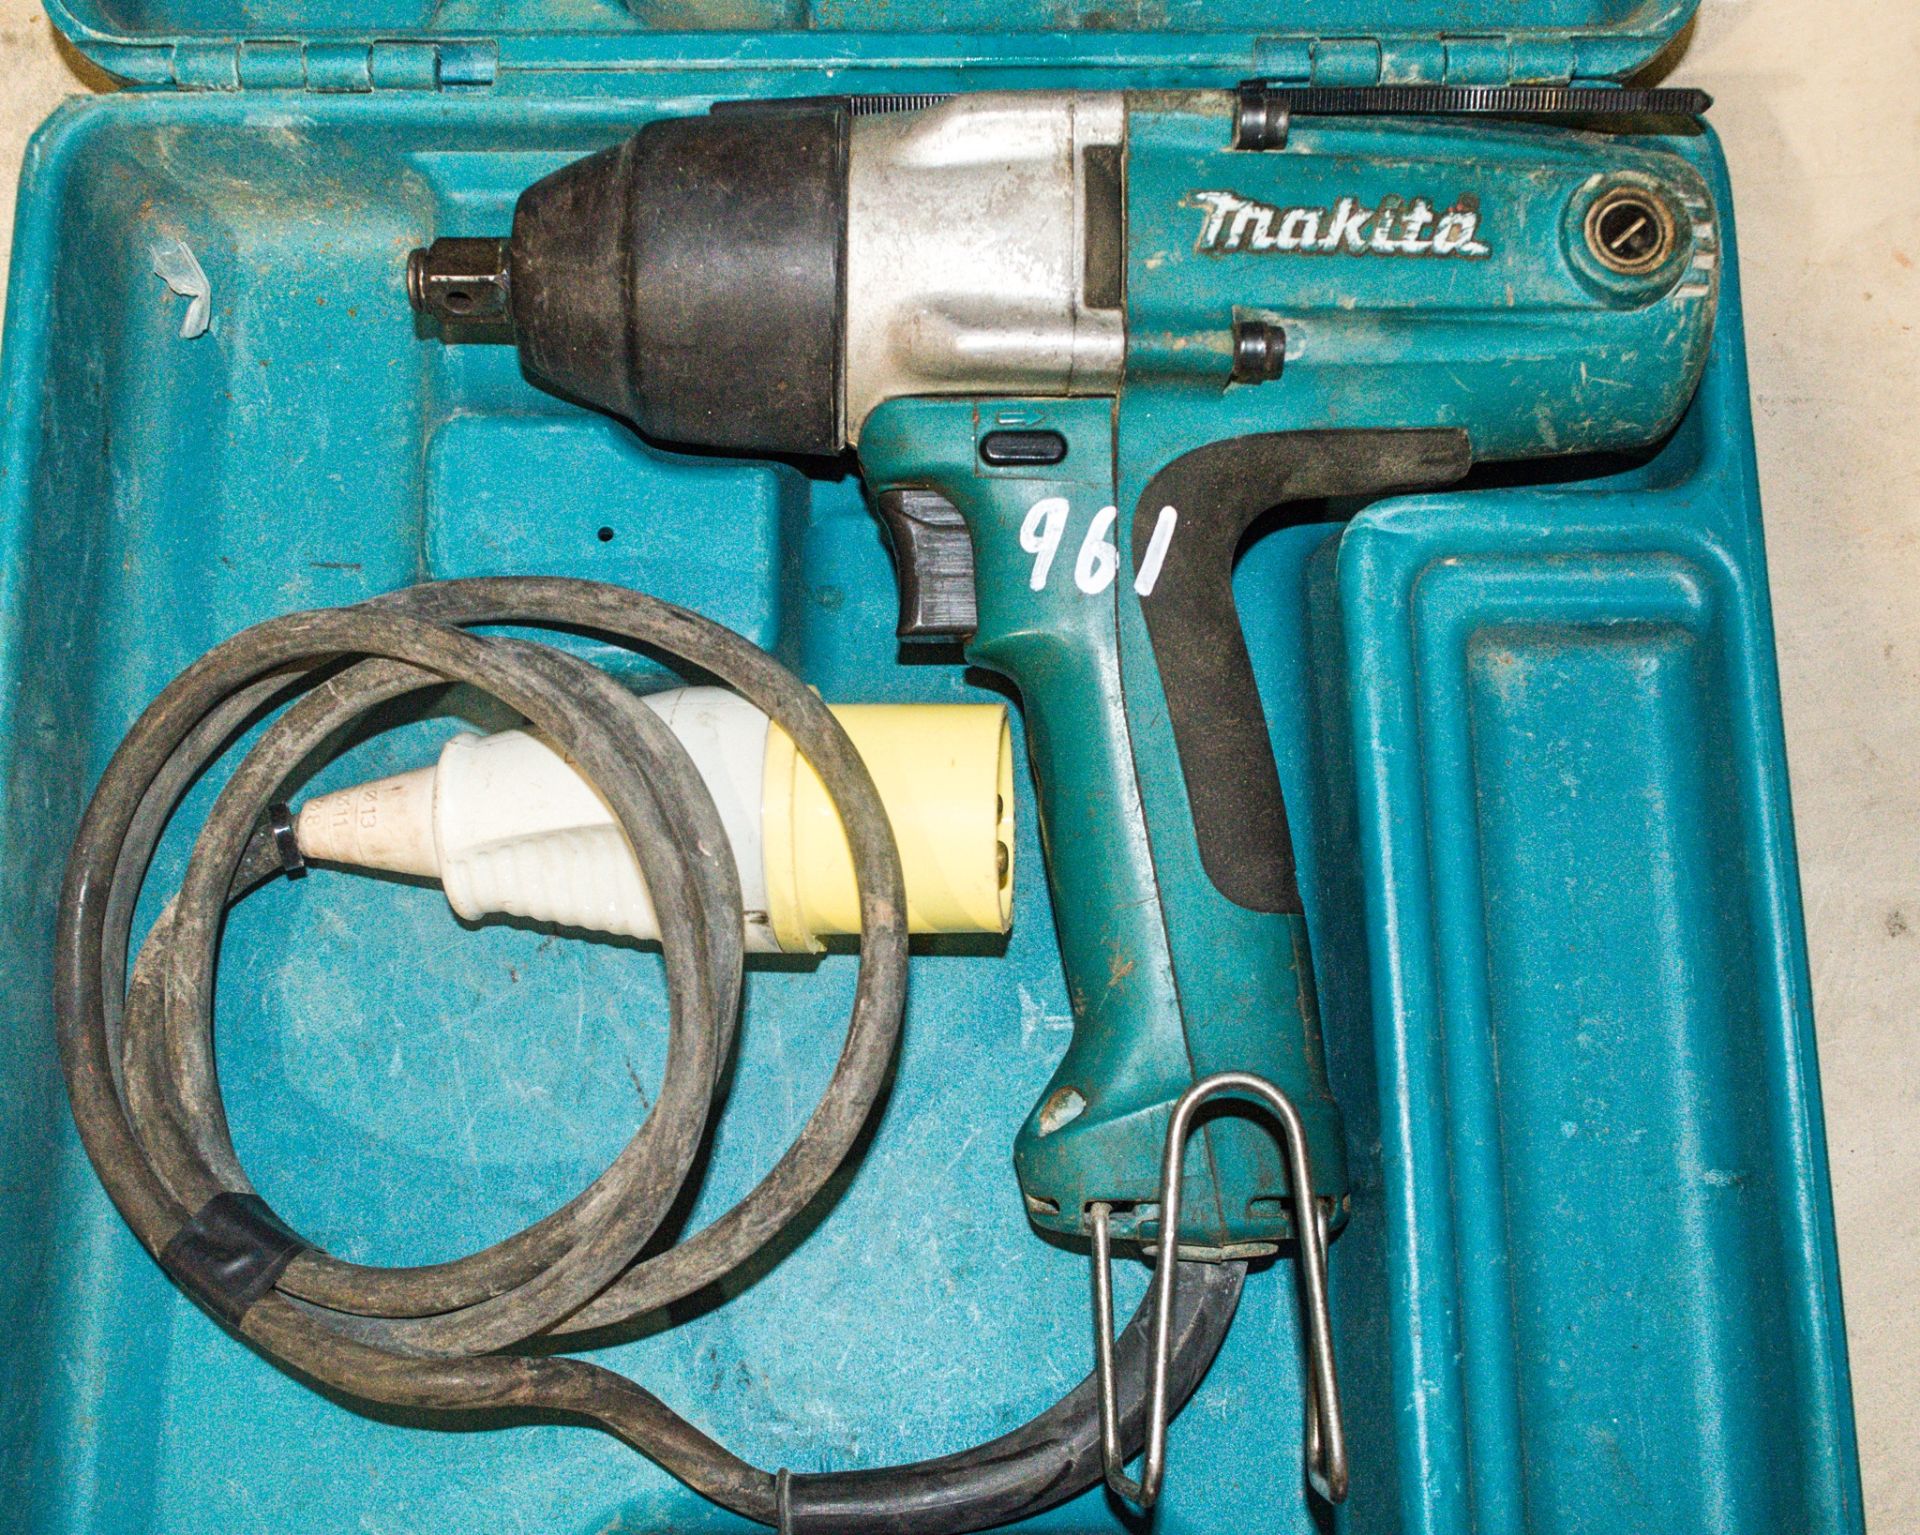 Makita 110v impact wrench c/w carry case